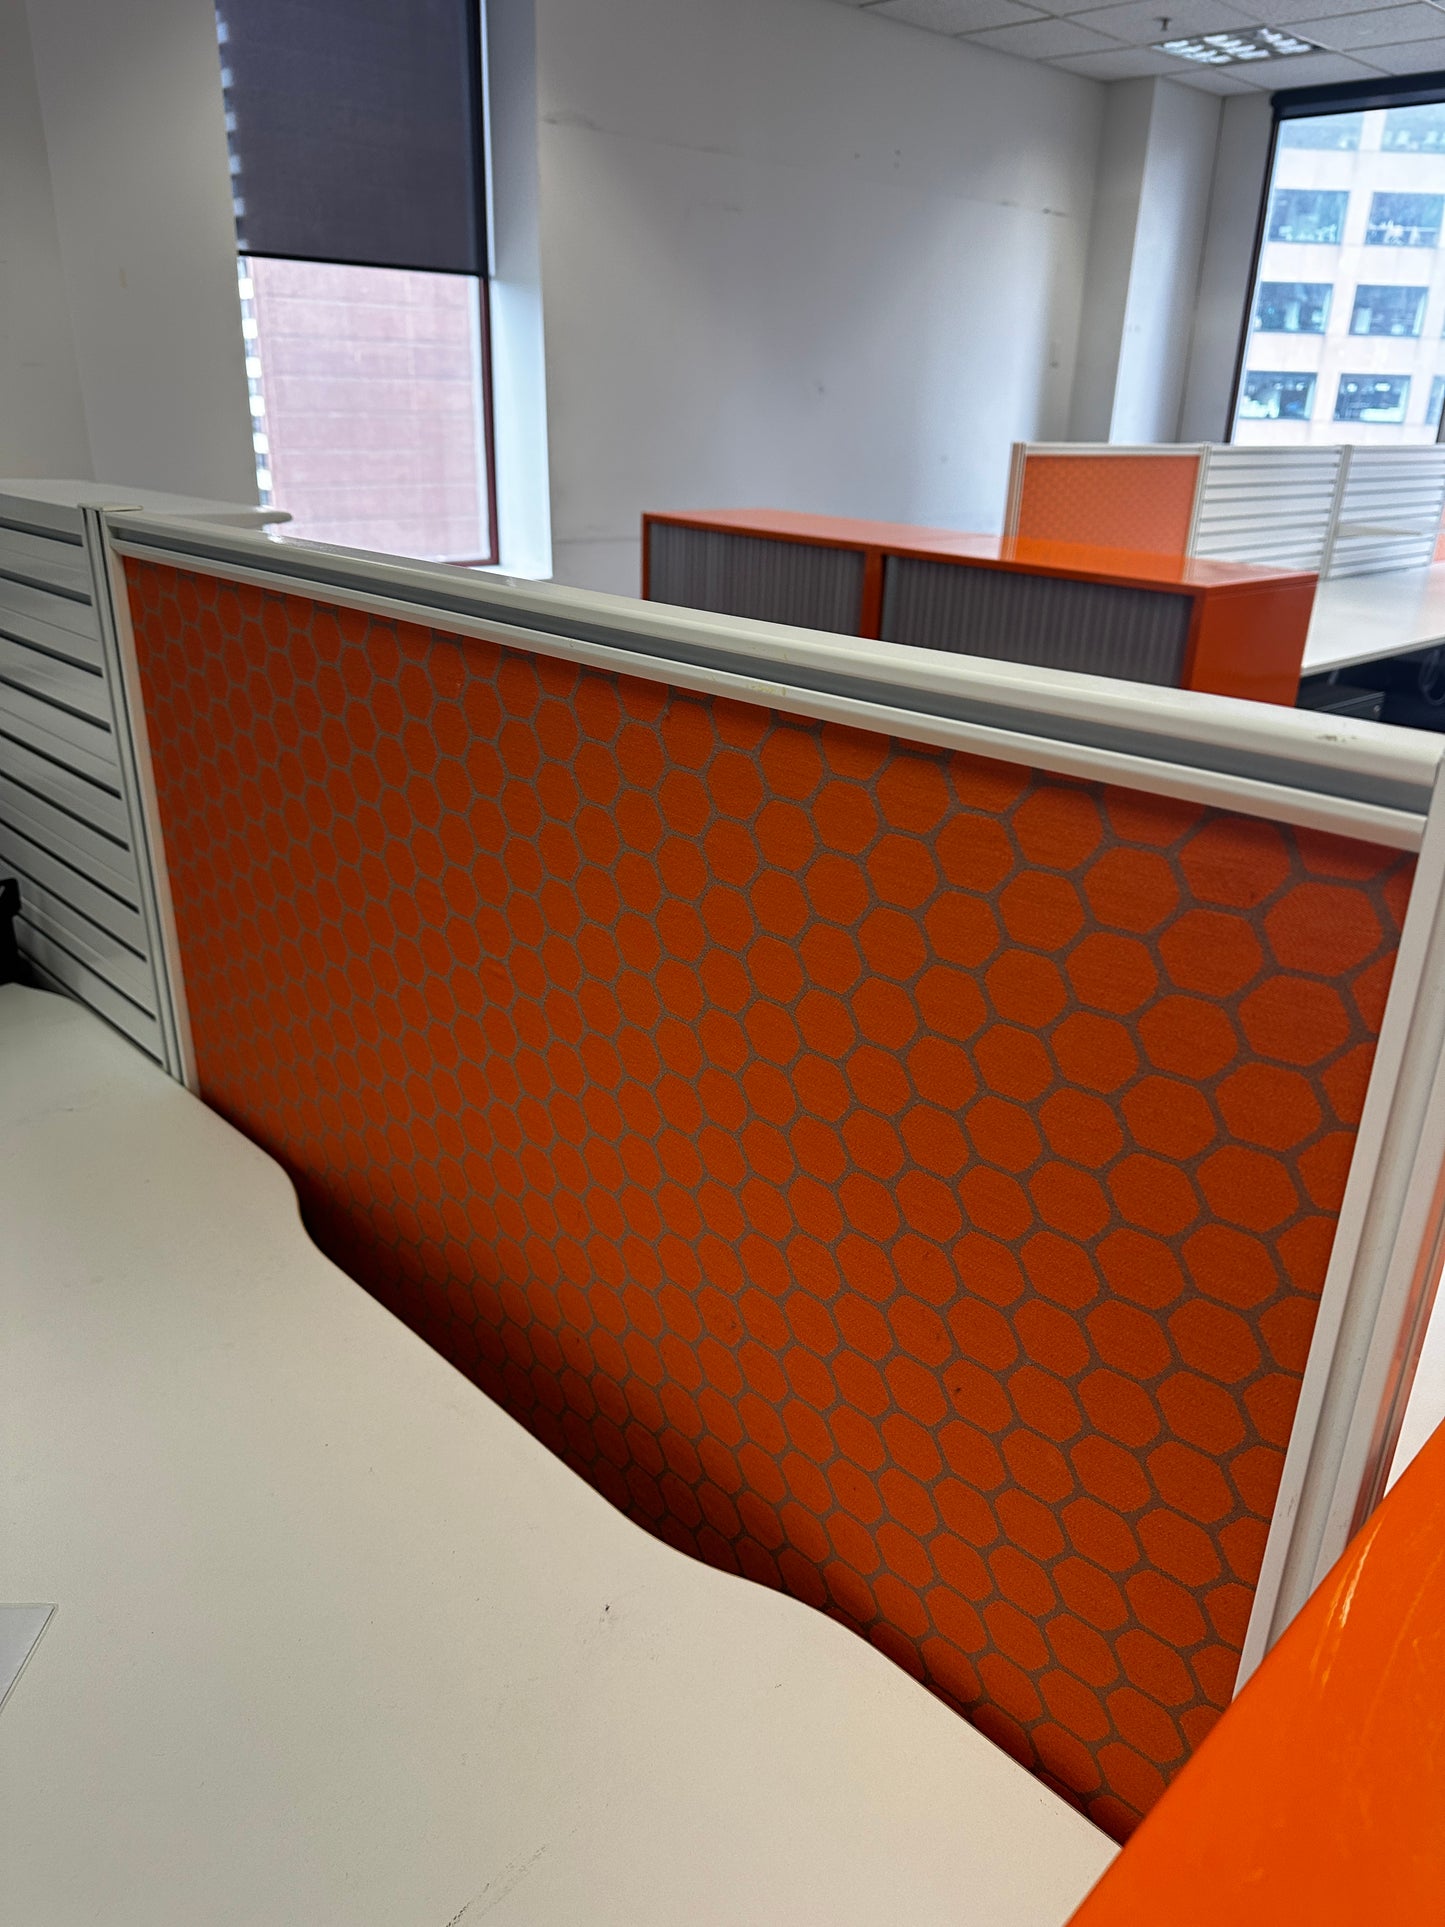 Methis Australia 4 Person Workstation with Orange Partitions